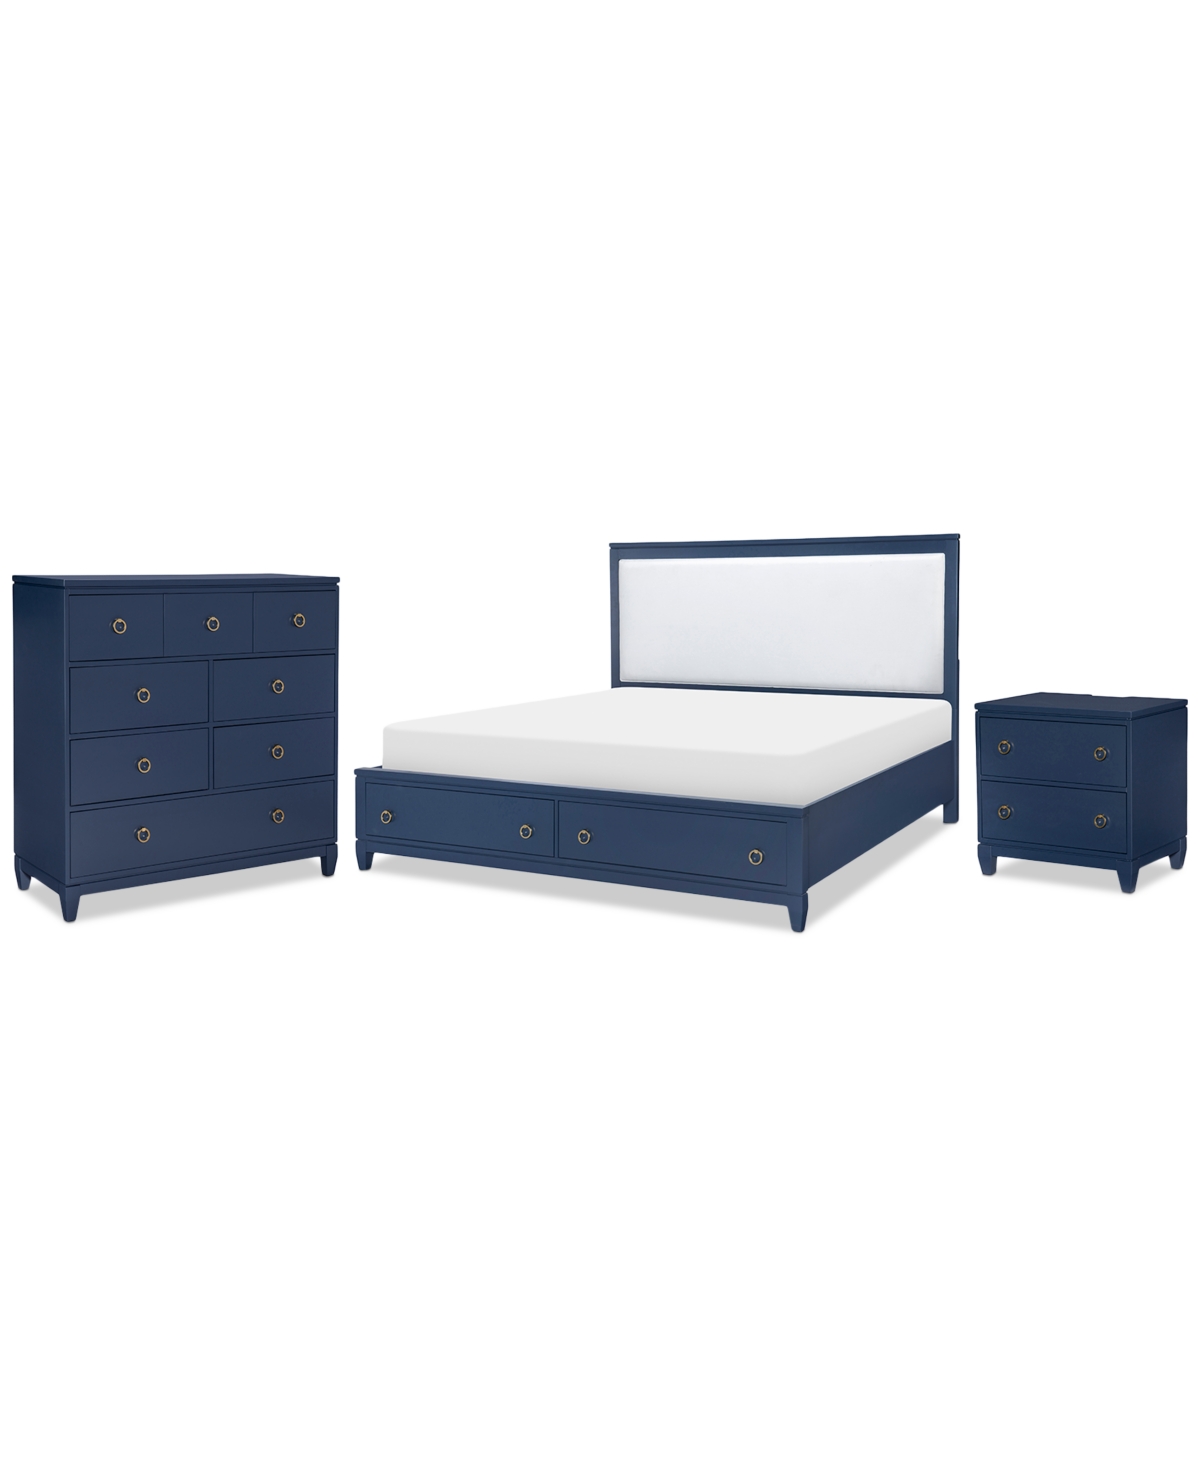 Furniture Summerland 3pc Bedroom Set (queen Upholstered Storage Bed, Chest, Nightstand) In Blue